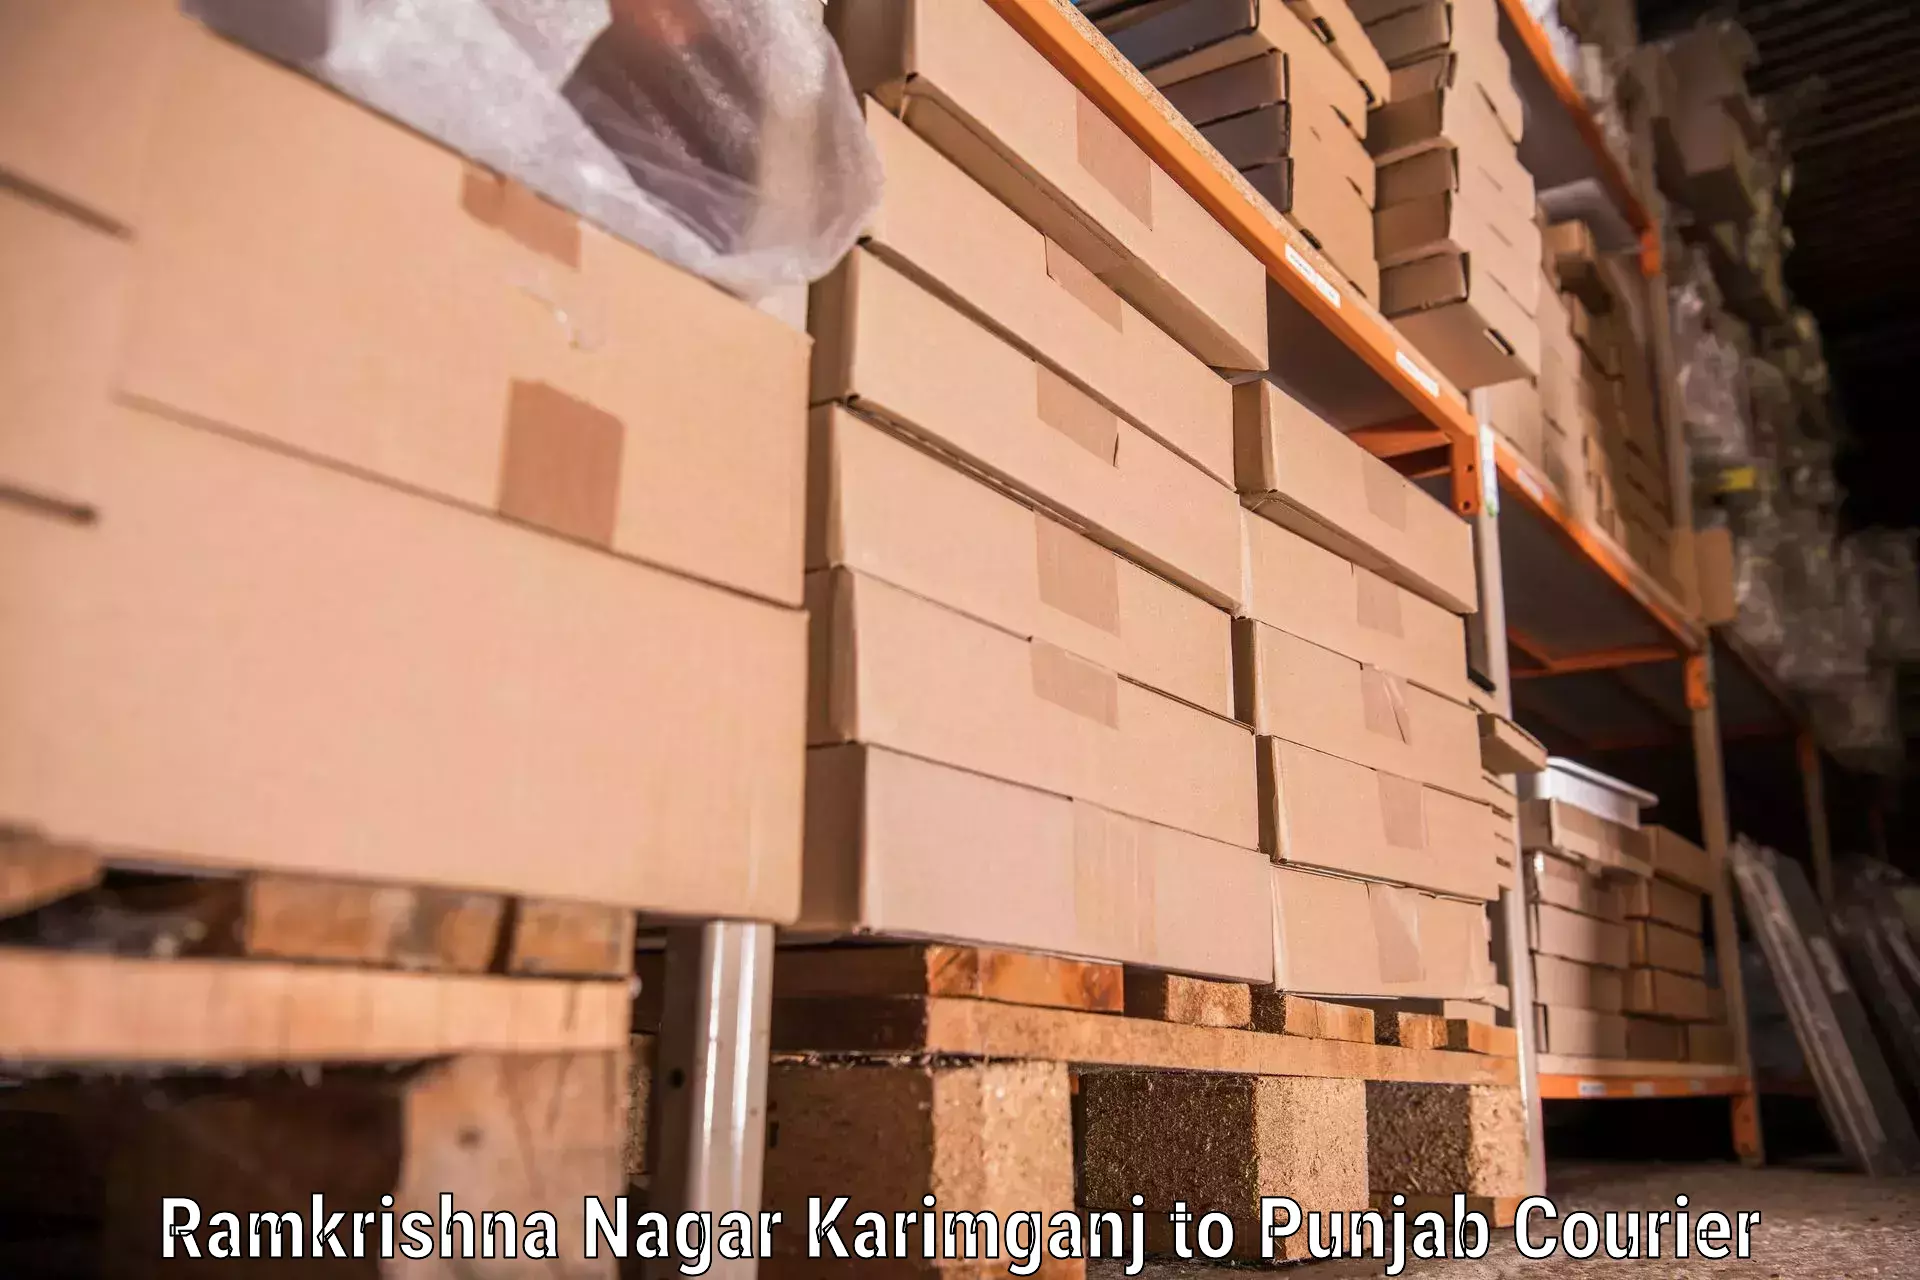 Residential relocation services Ramkrishna Nagar Karimganj to Thapar Institute of Engineering and Technology Patiala